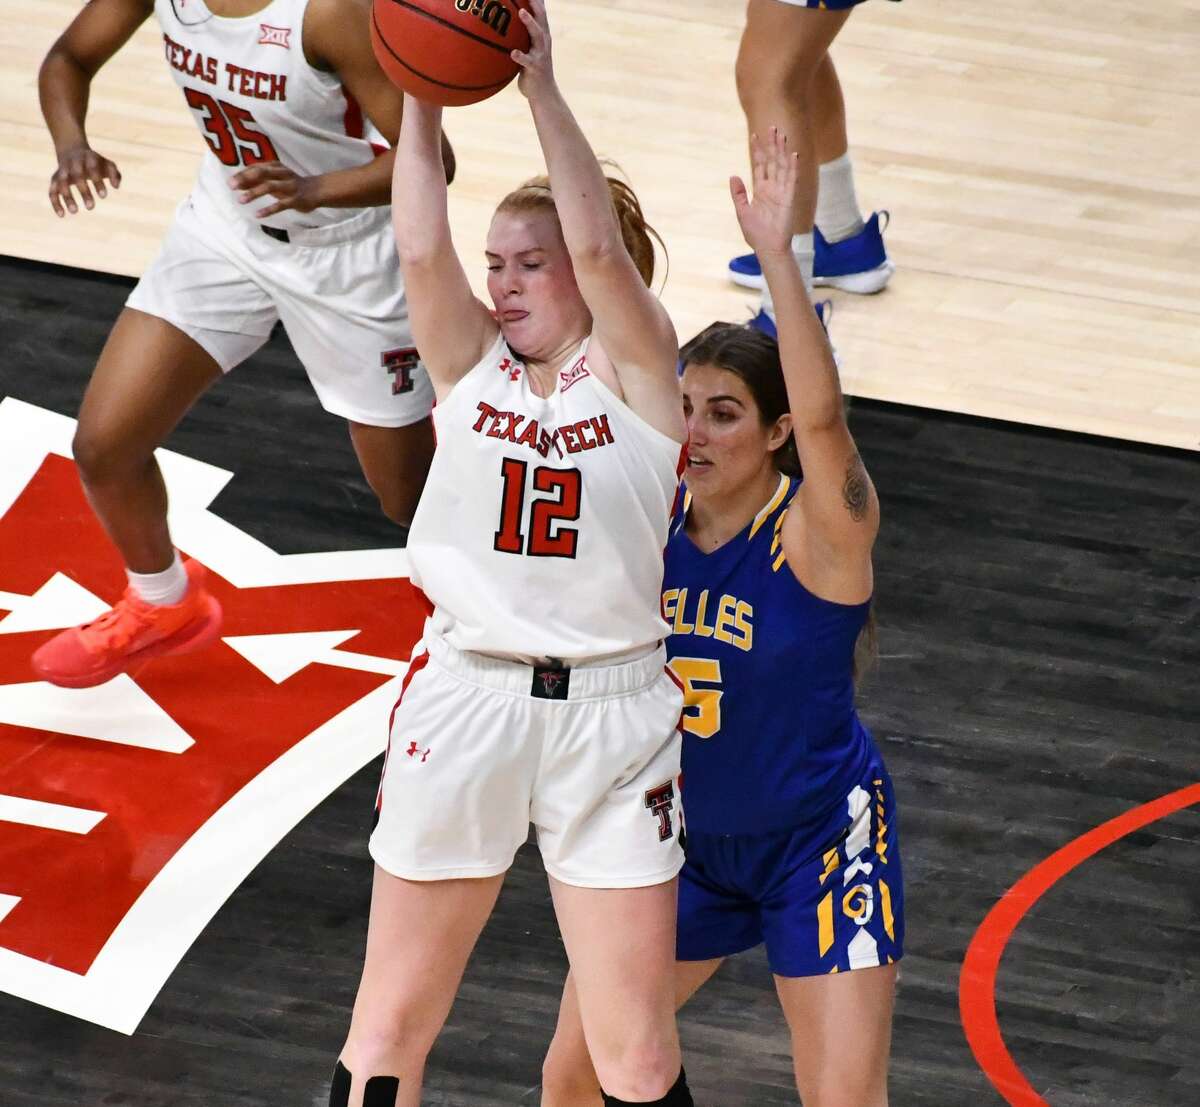 The Texas Tech women's basketball team hosted Angelo State in a non-conference women's college basketball game on Dec. 9, 2020 in the United Supermarkets Arena in Lubbock.